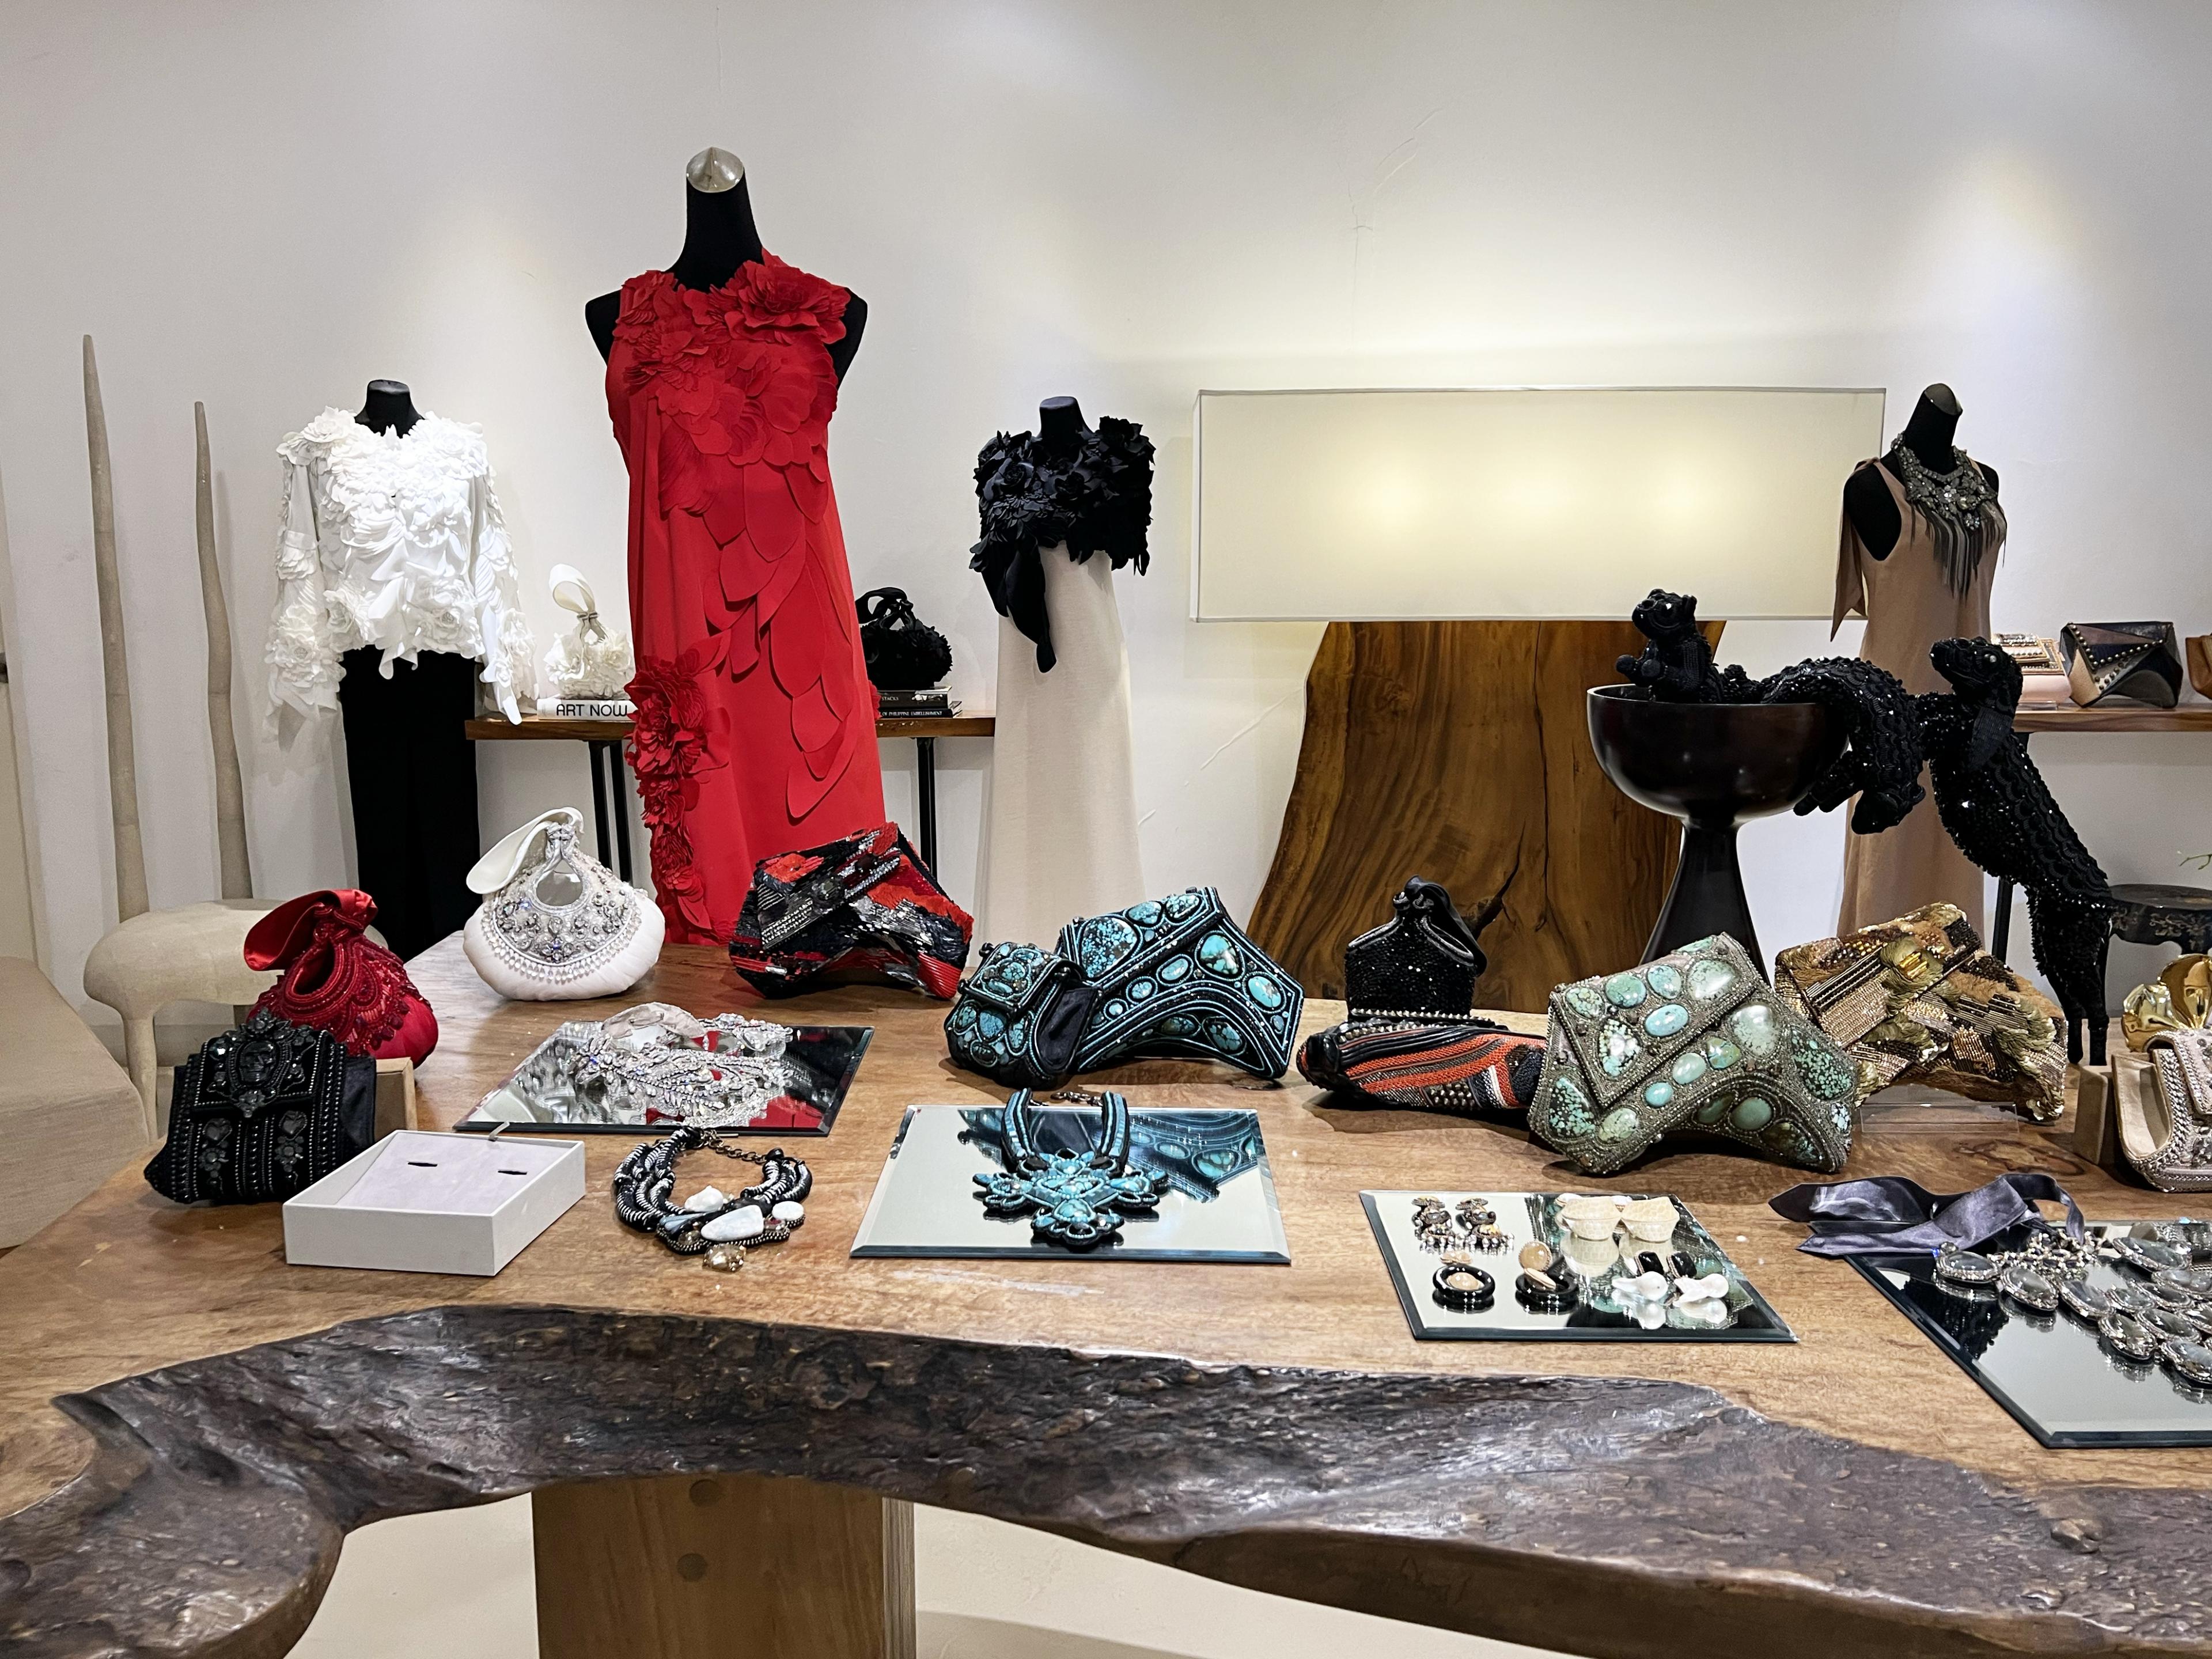 women's fashions and jewelry on display in white-walled shop with a red dress with sculptural collar